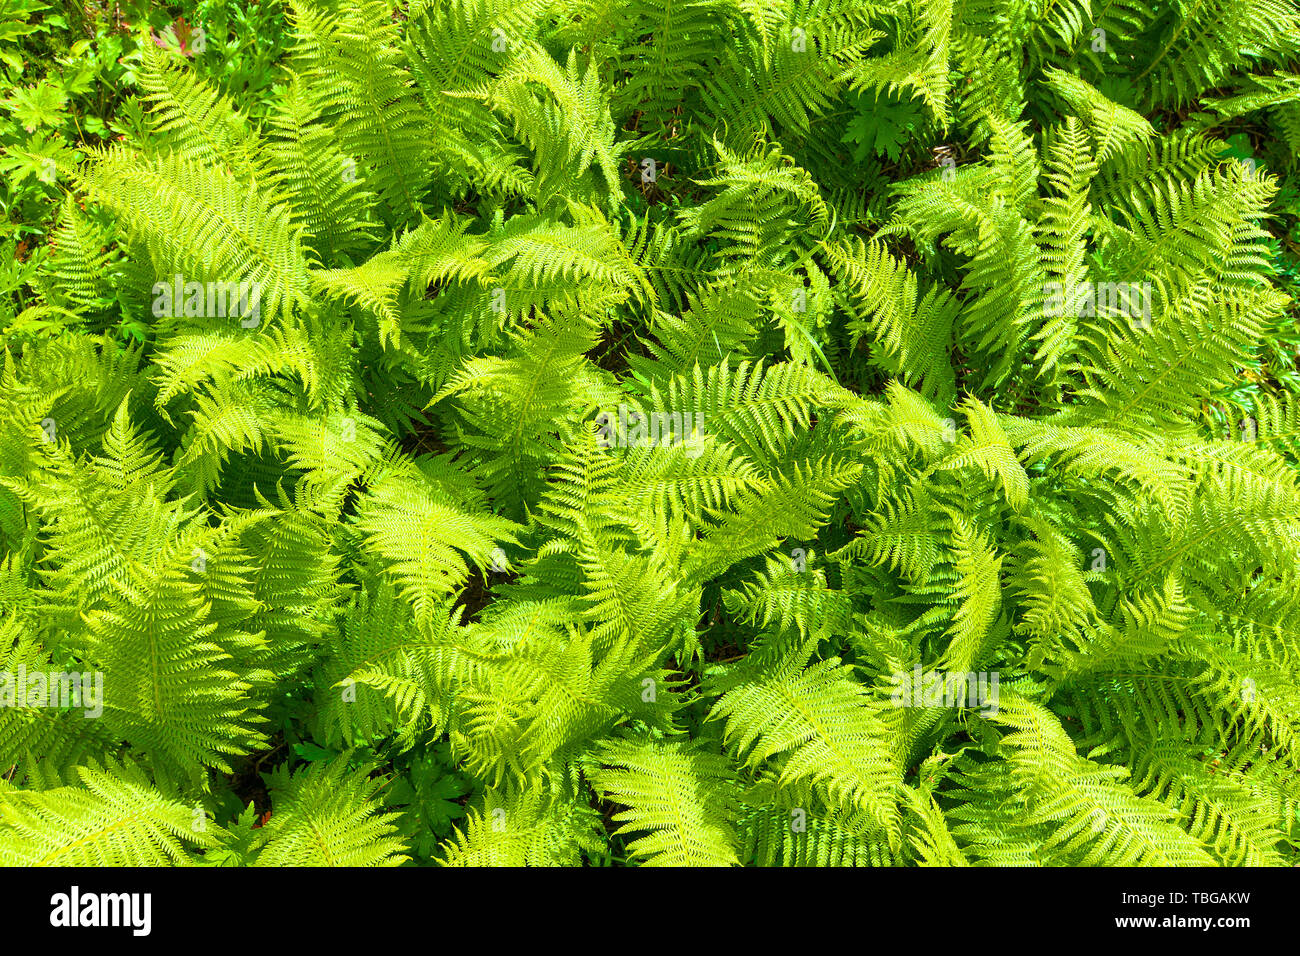 Nephrolepis exaltata (The Sword Fern) - a species of fern in the family Lomariopsidaceae Stock Photo